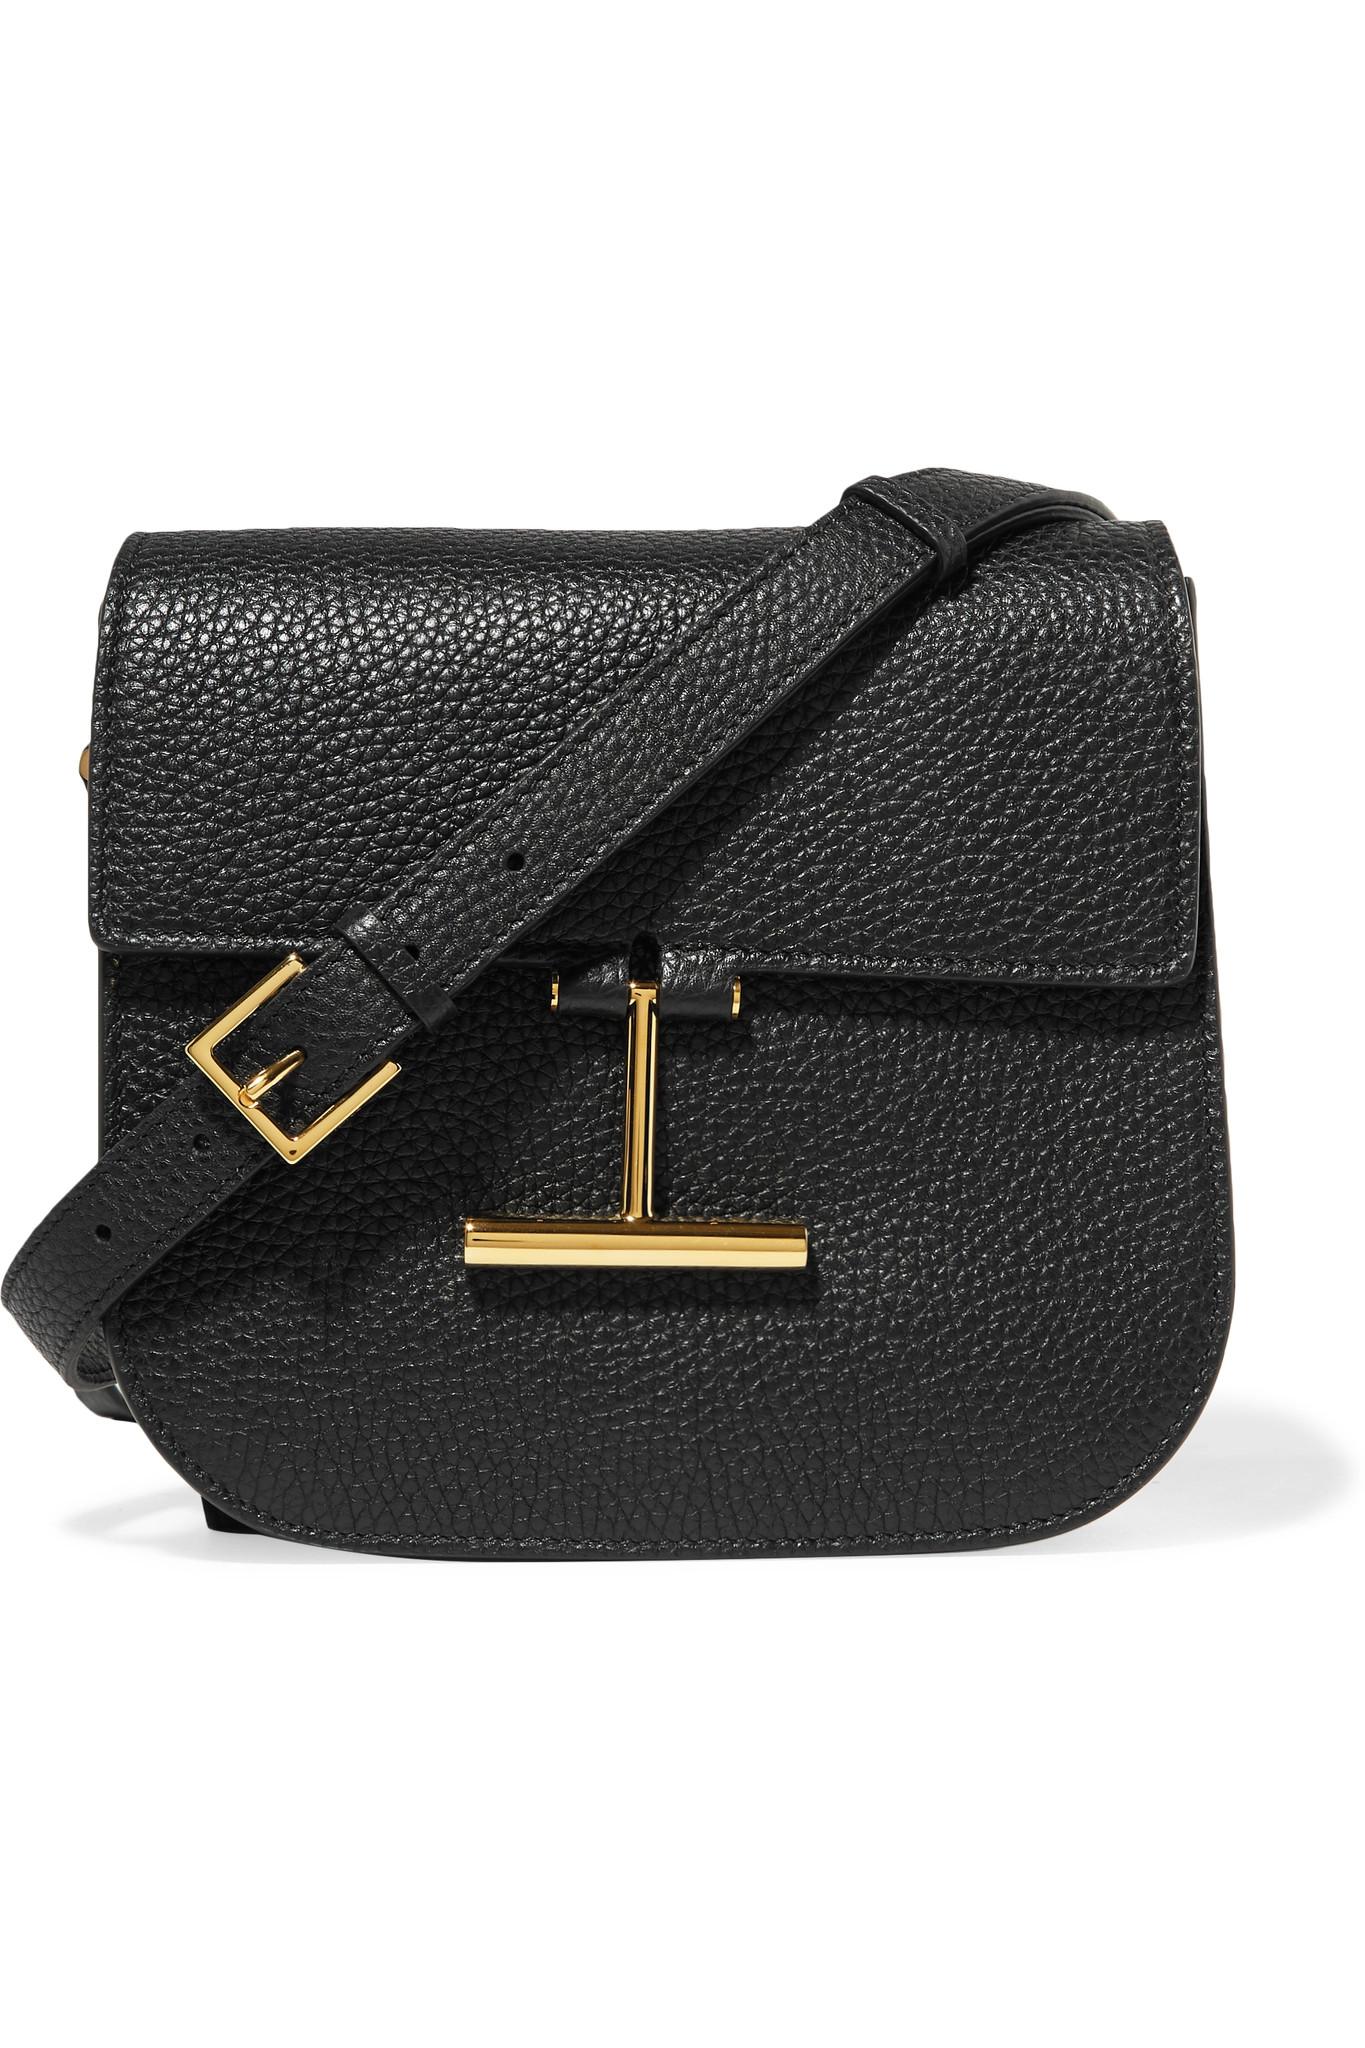 Tom Ford Tara Small Textured-leather Shoulder Bag in Black | Lyst